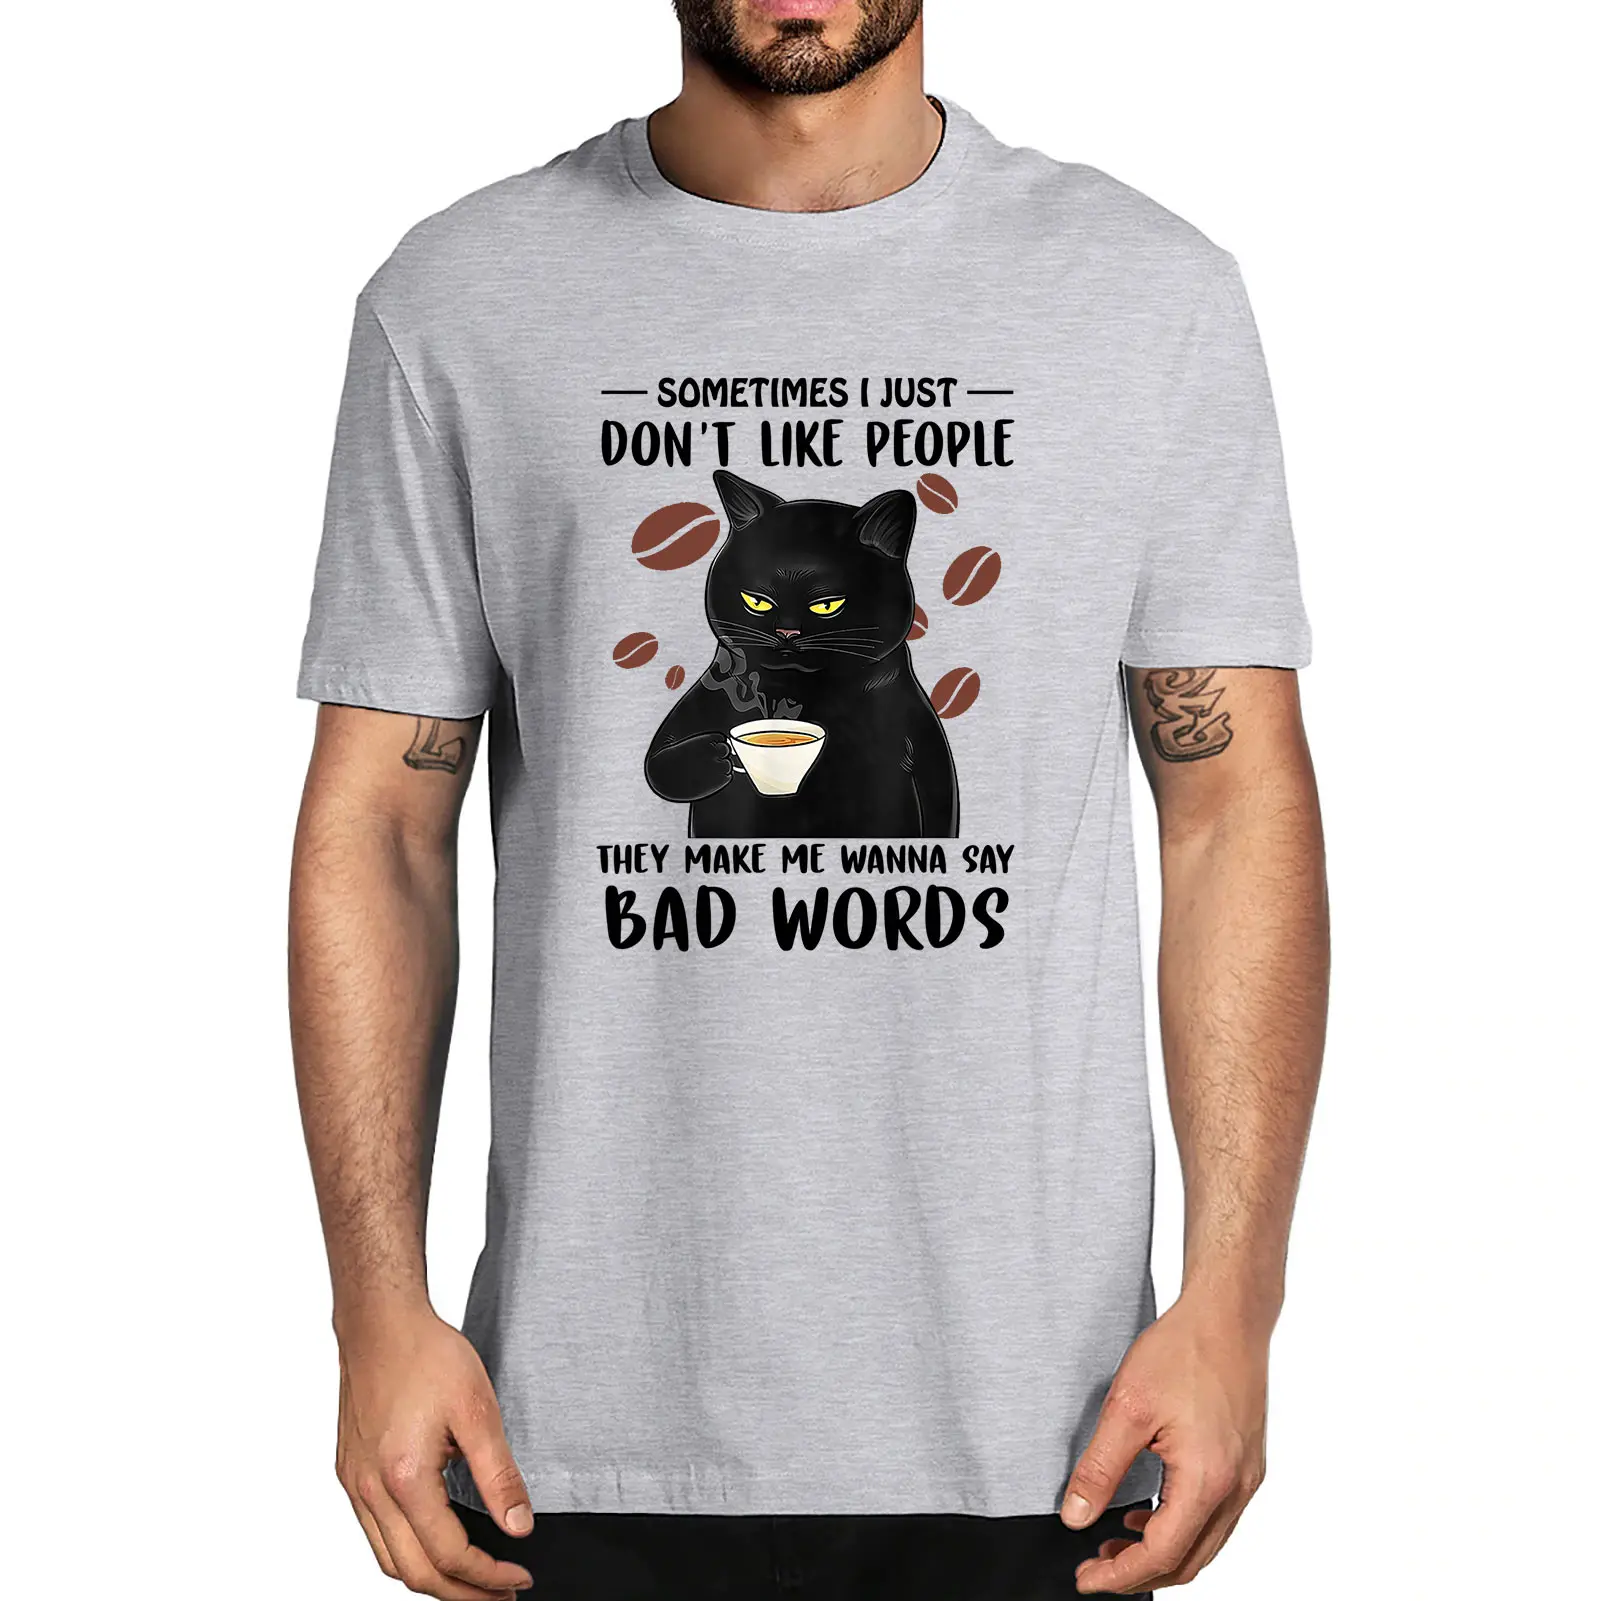 

Summer Black Cat Sometimes Don’t Like People They Make Me Say Bad Words Men's 100% Cotton Novelty T-Shirt Unisex Humor Funny Tee